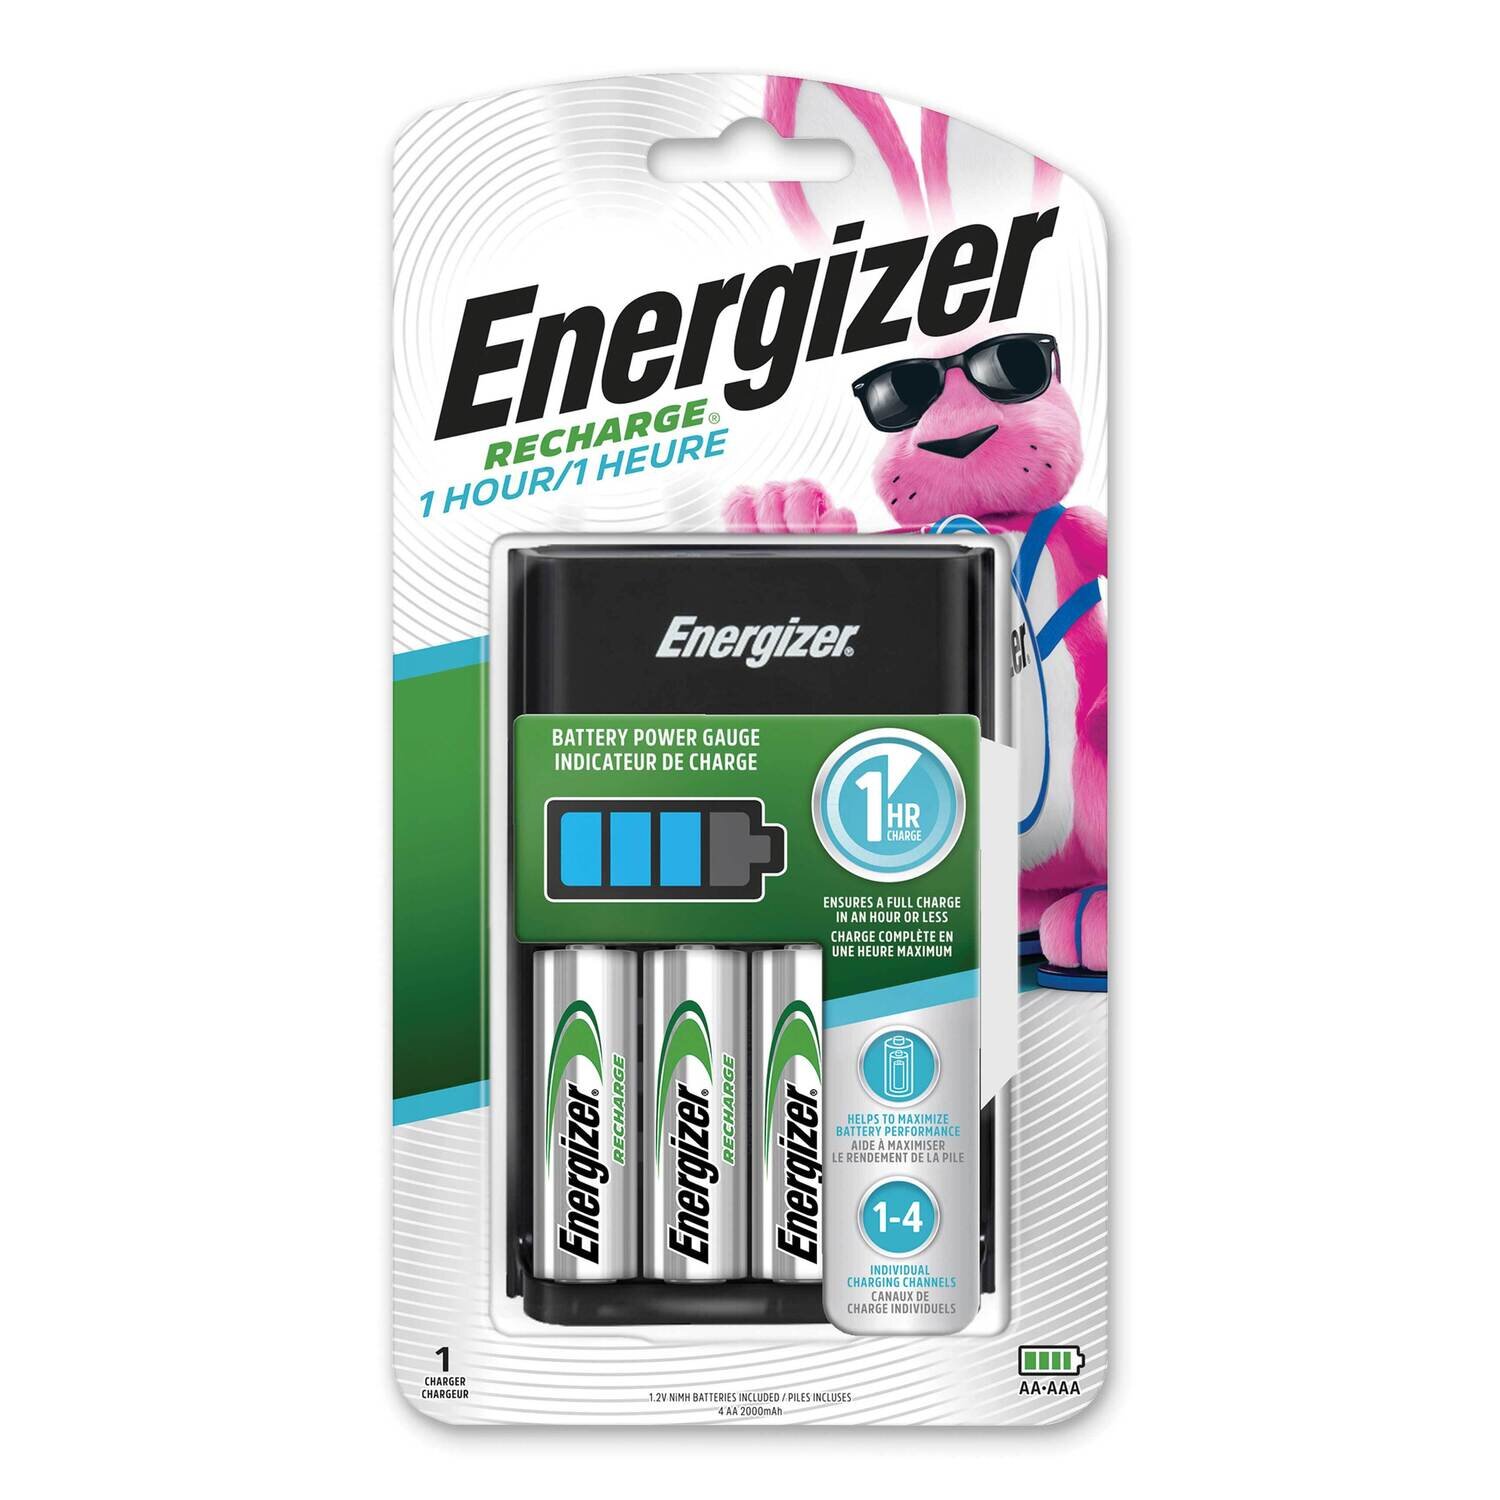 Energizer Recharge 1-Hour Charger for Rechargeable AA and AAA Batteries WBCH1